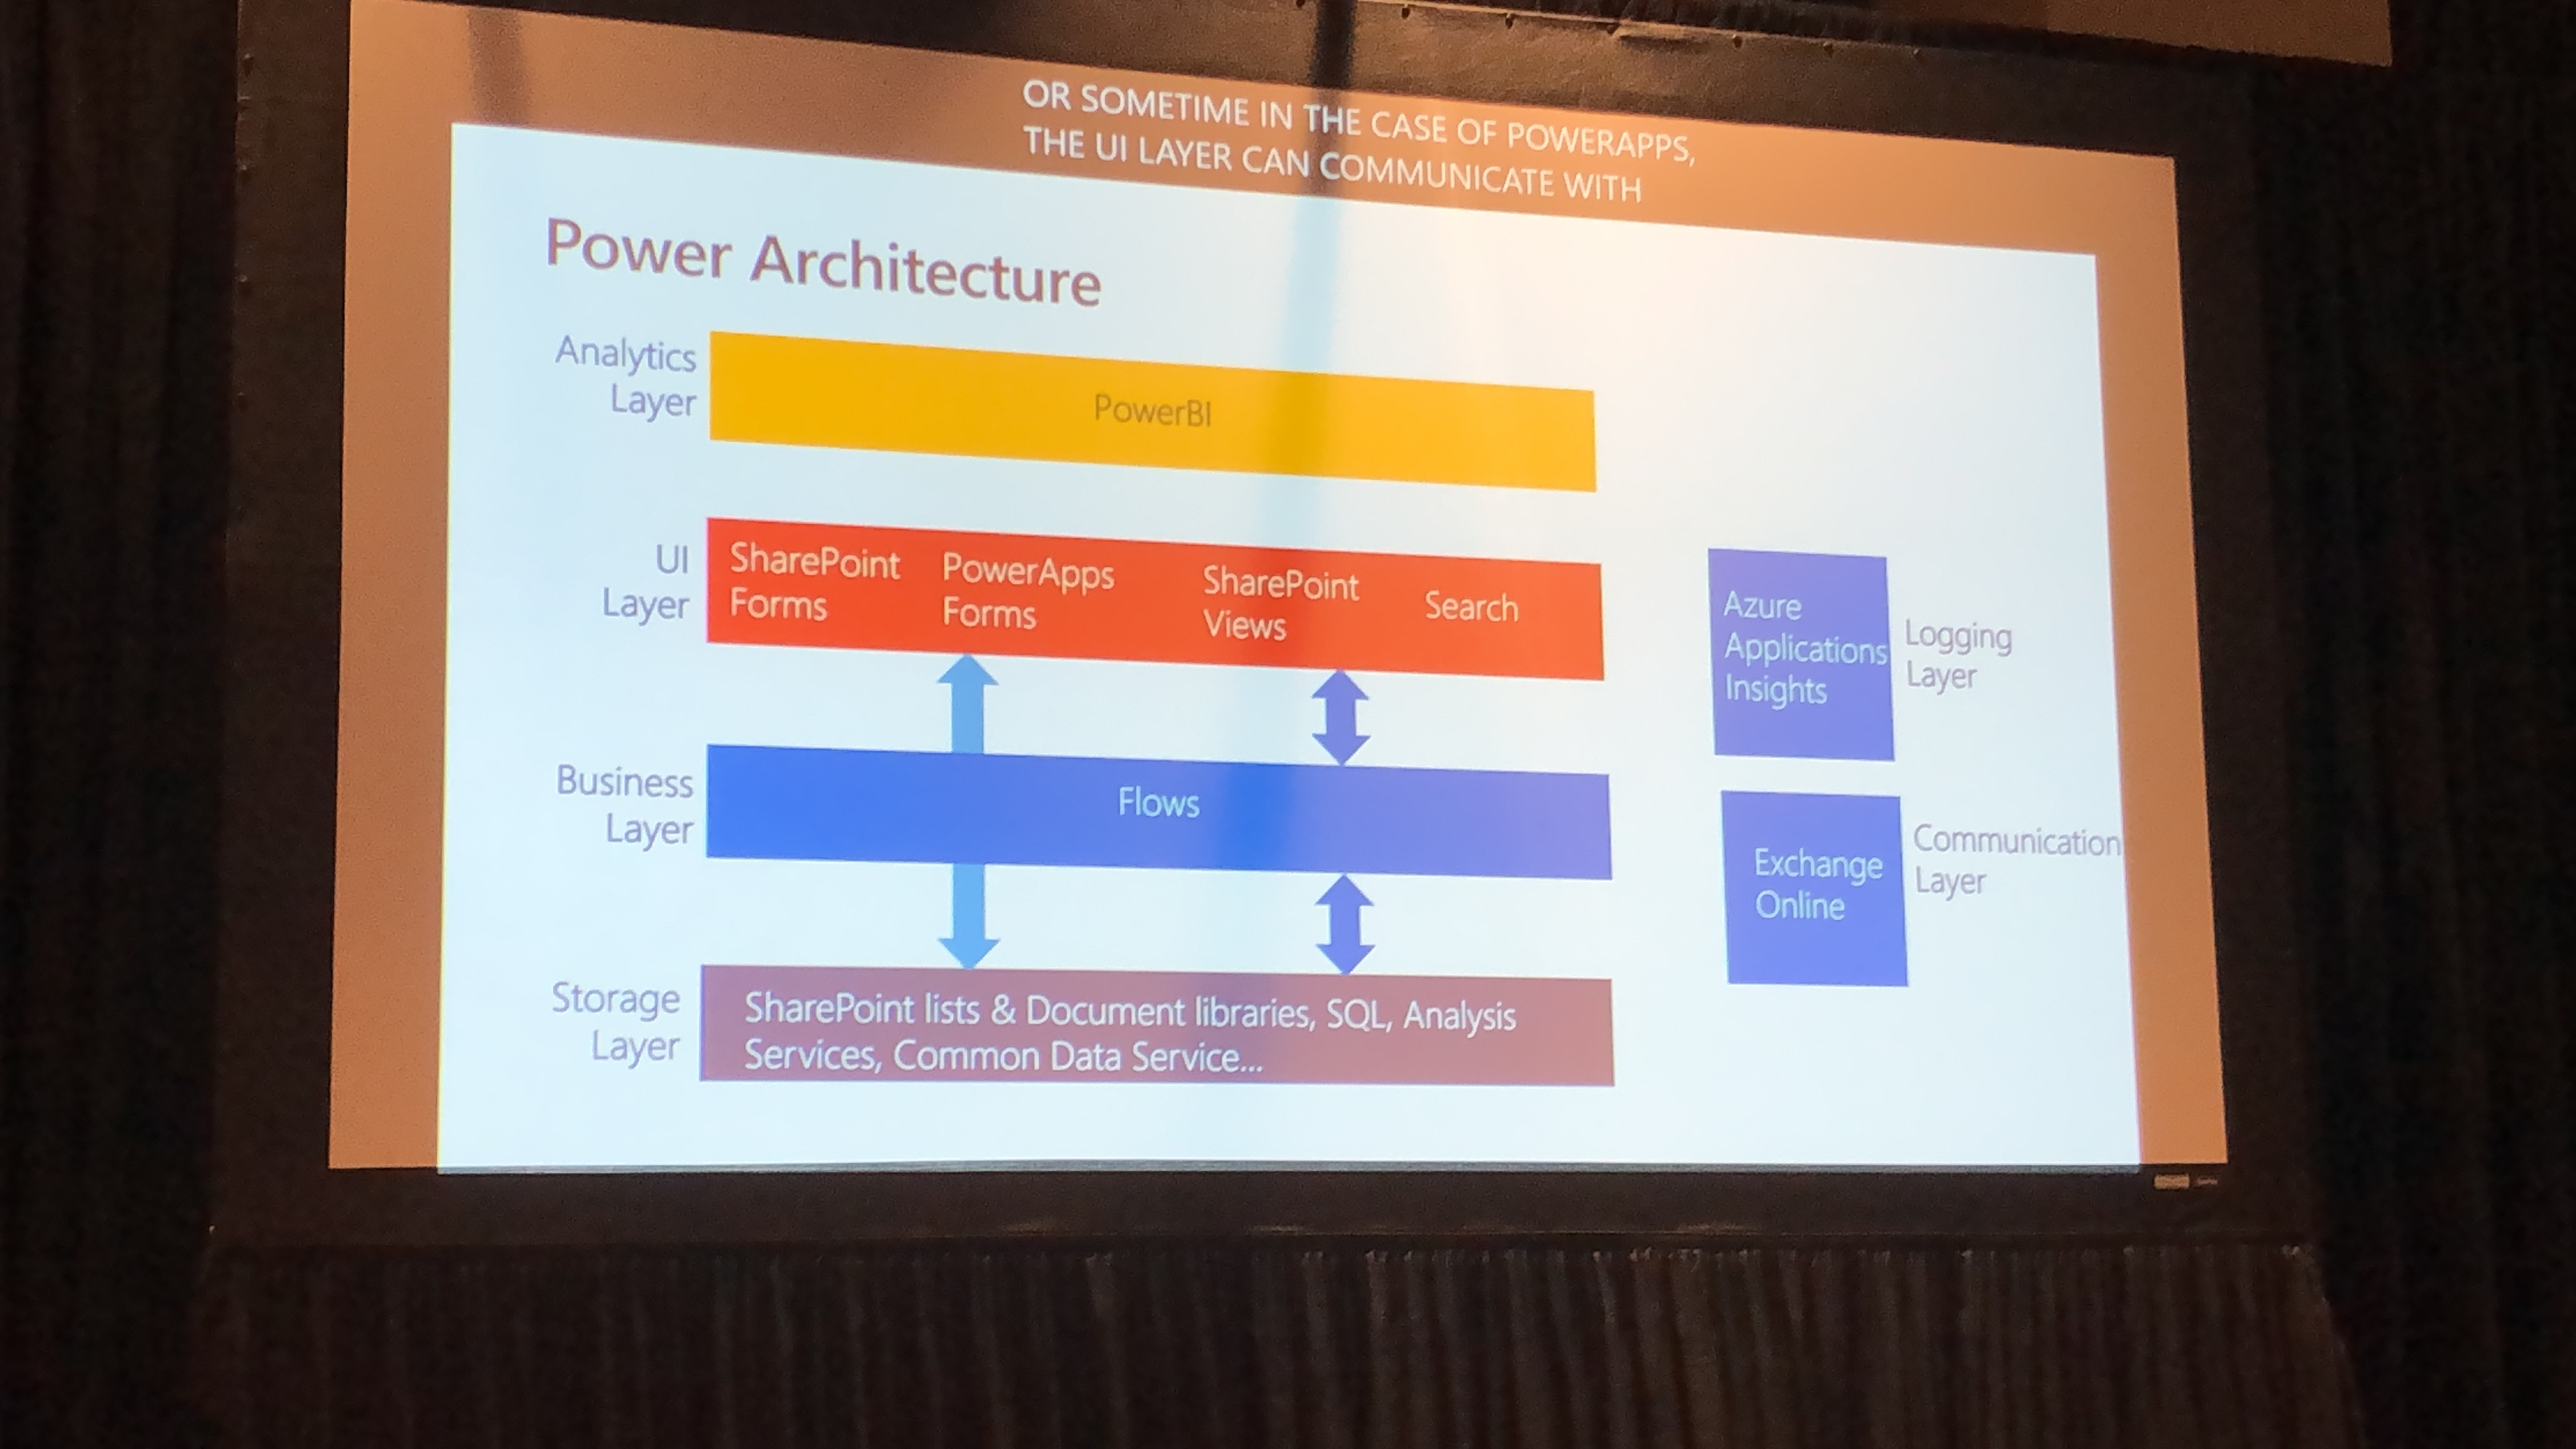 Image of structure of Power Architecture